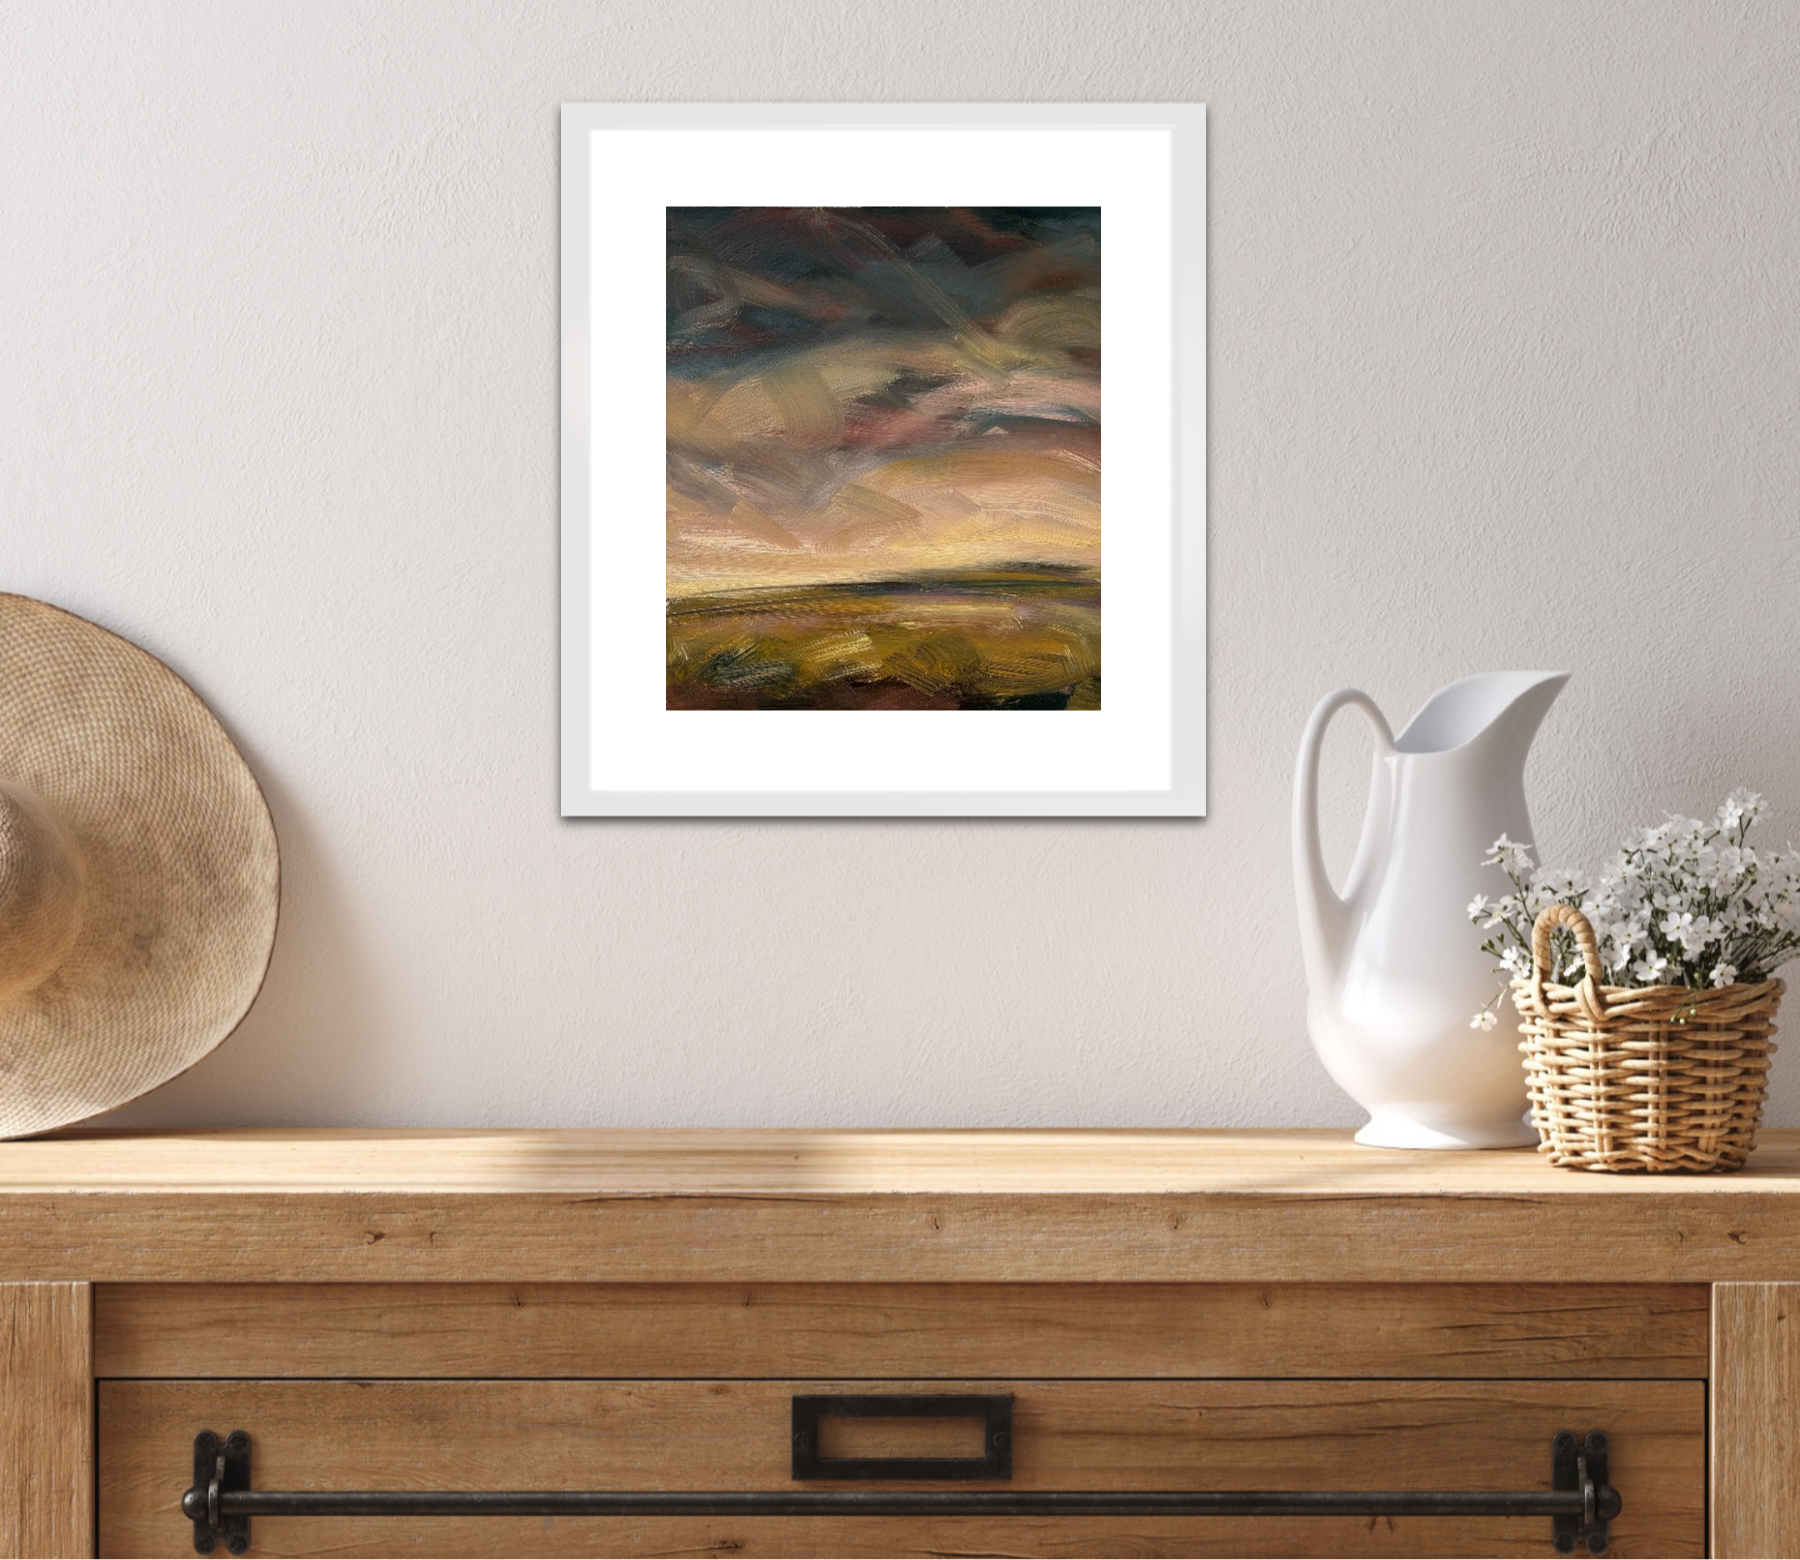 Evening Falls Original Oil On Paper Landscape Painting In Room Setting 2